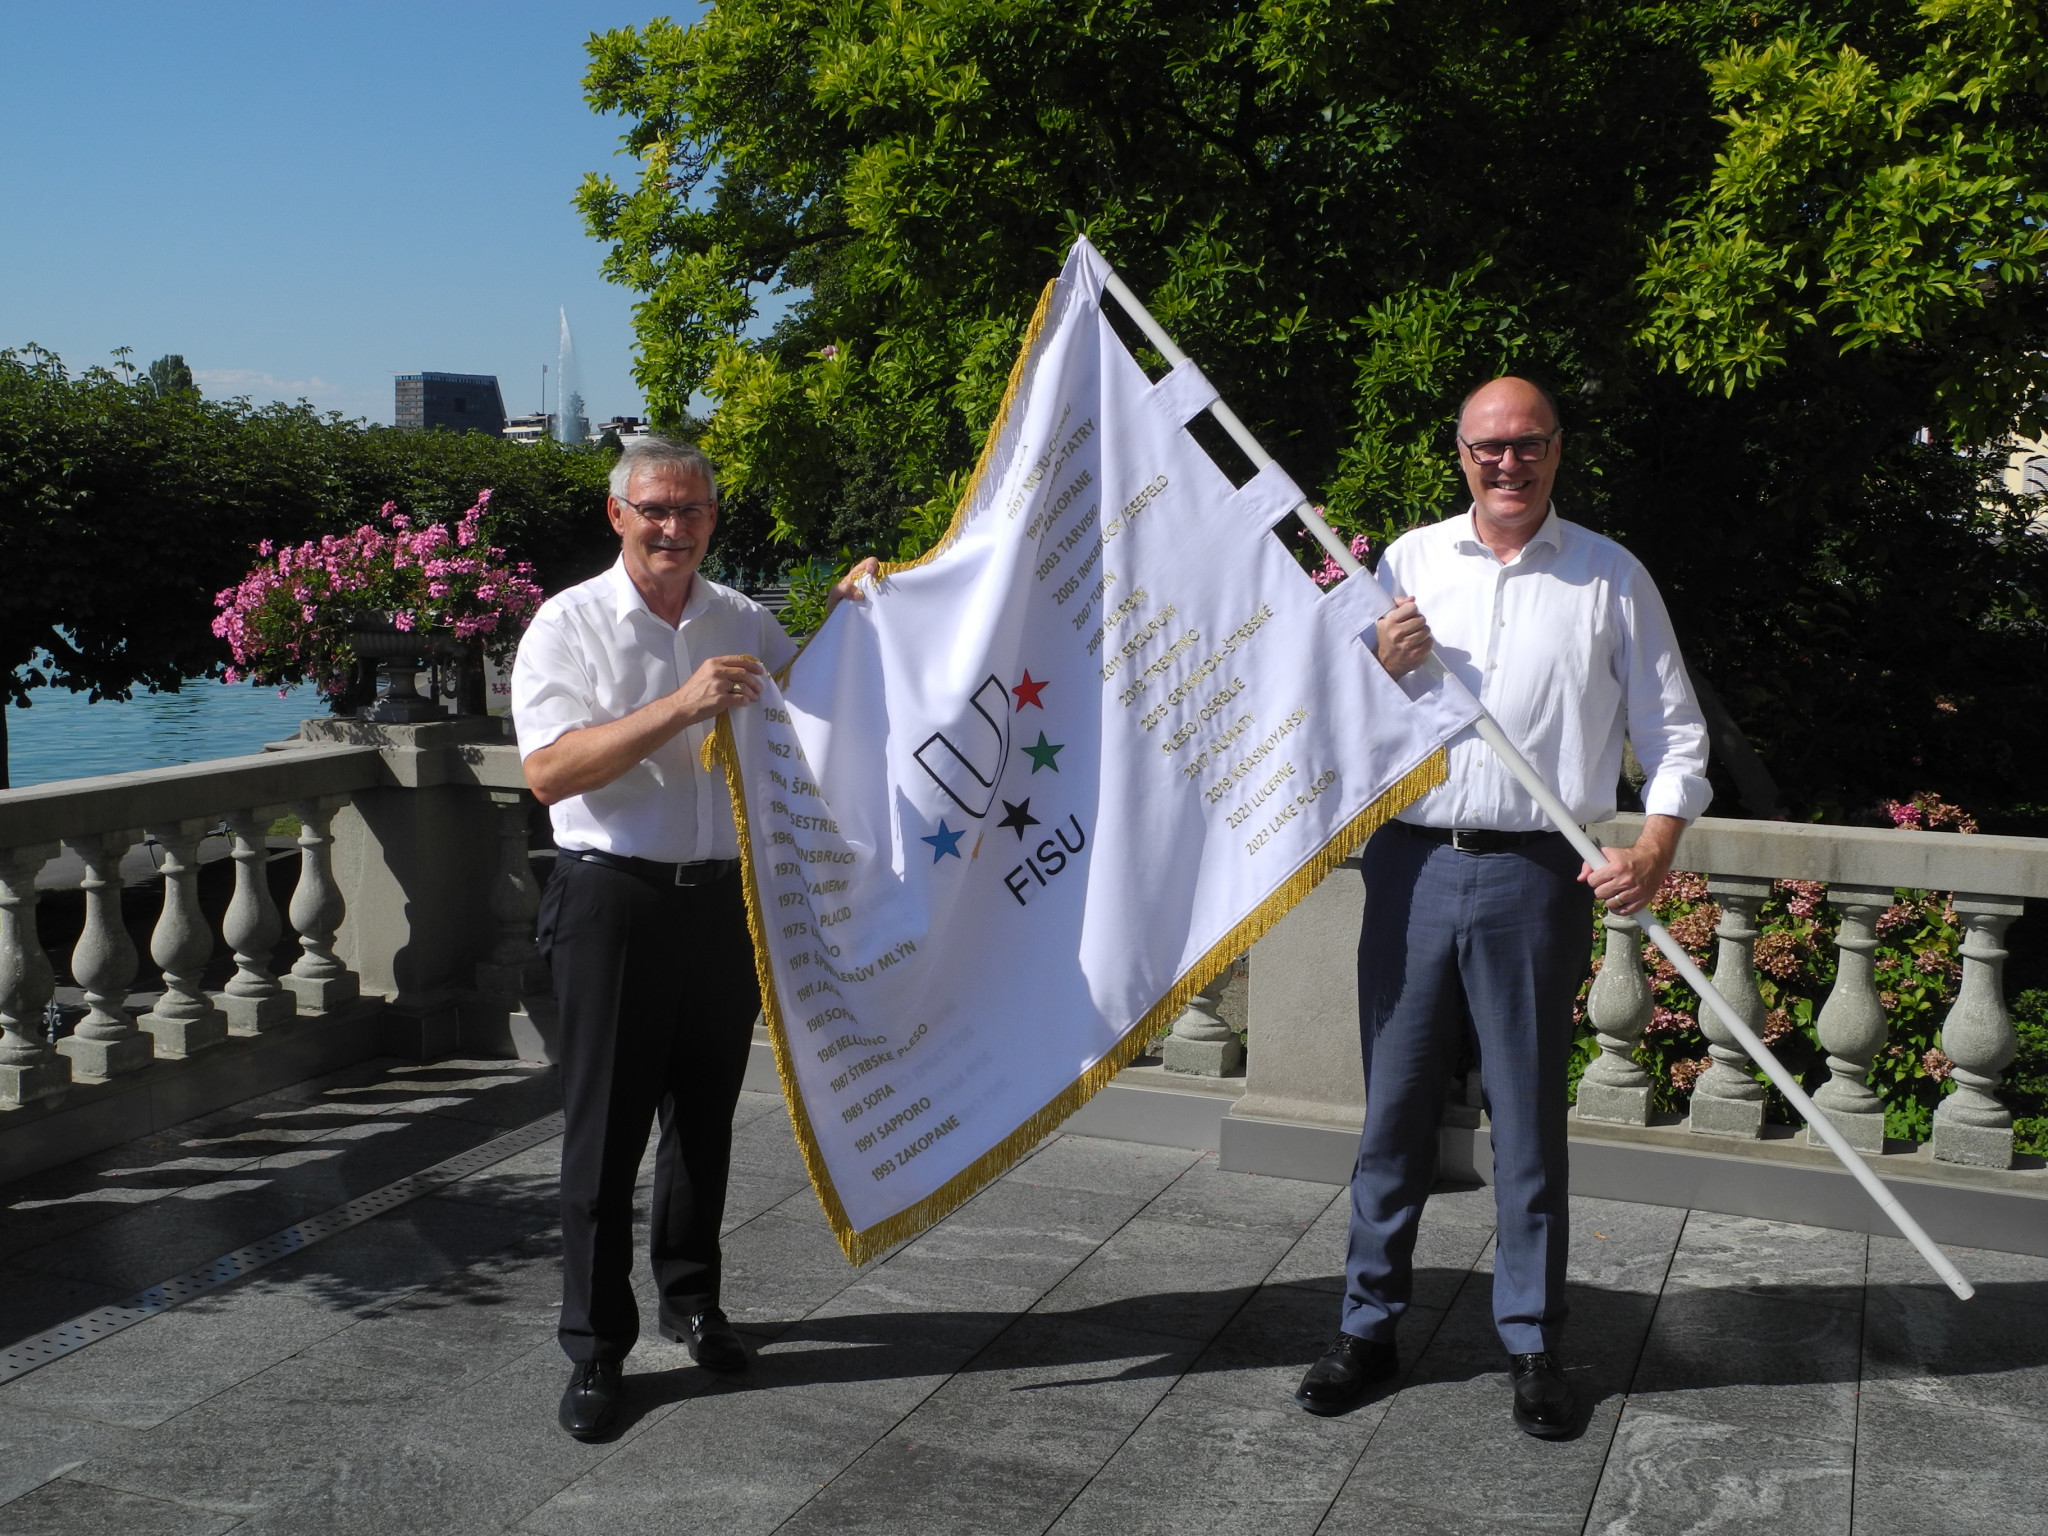 The two Cantonal Councillors Barraud Andreas (Schwyz) and Martin Pfister (Zug) with the FISU flag ©Lucerne 2021